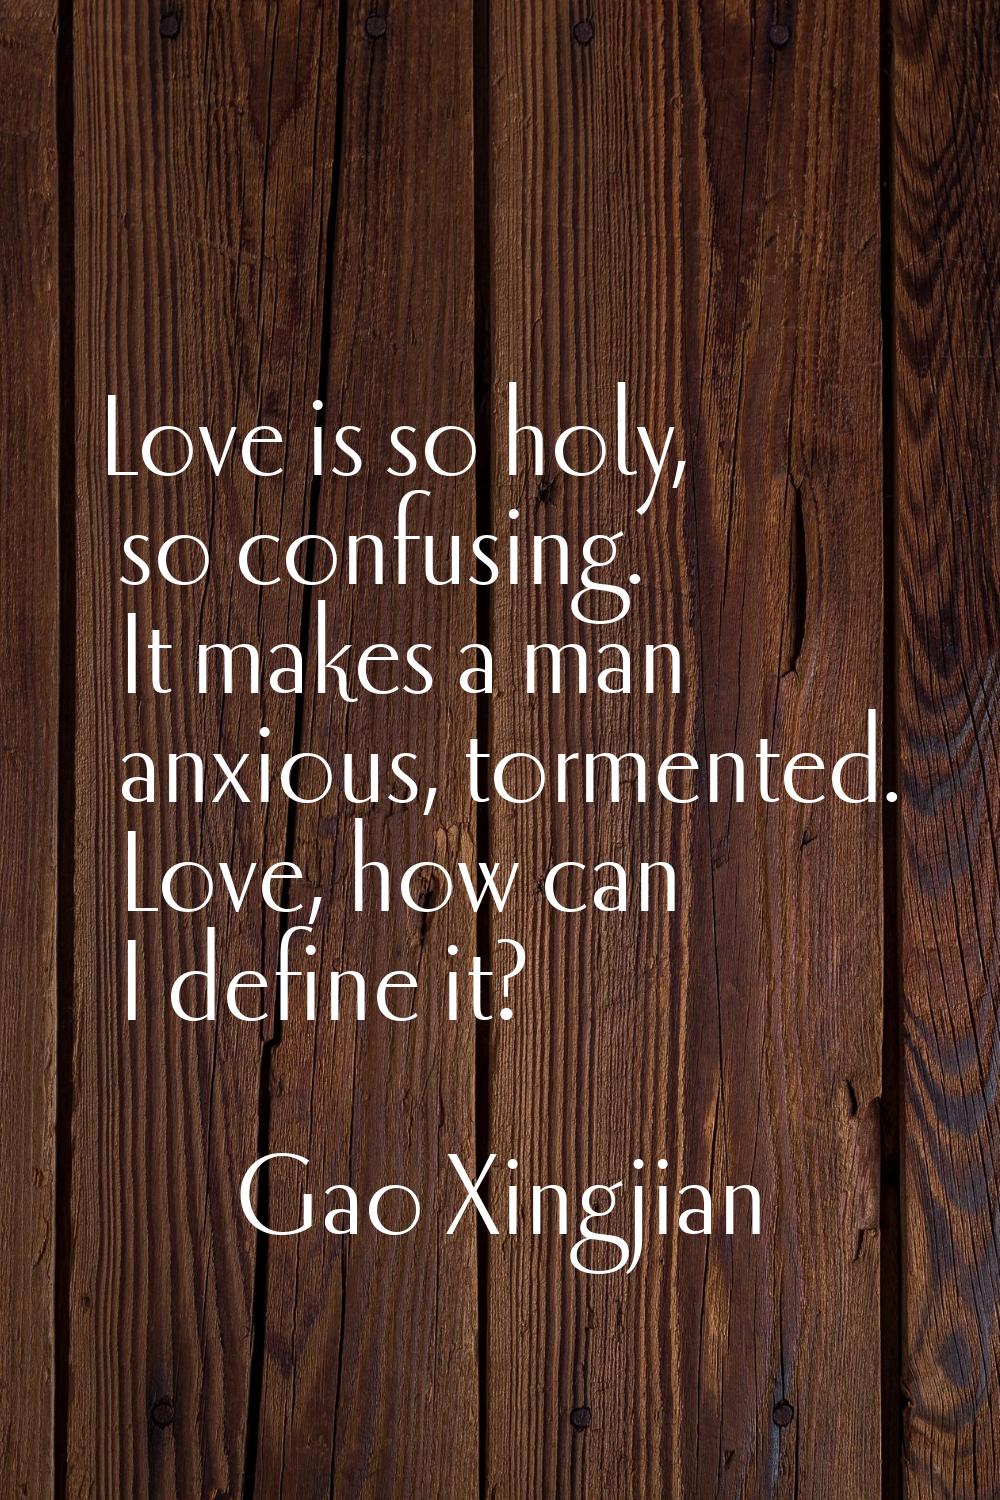 Love is so holy, so confusing. It makes a man anxious, tormented. Love, how can I define it?